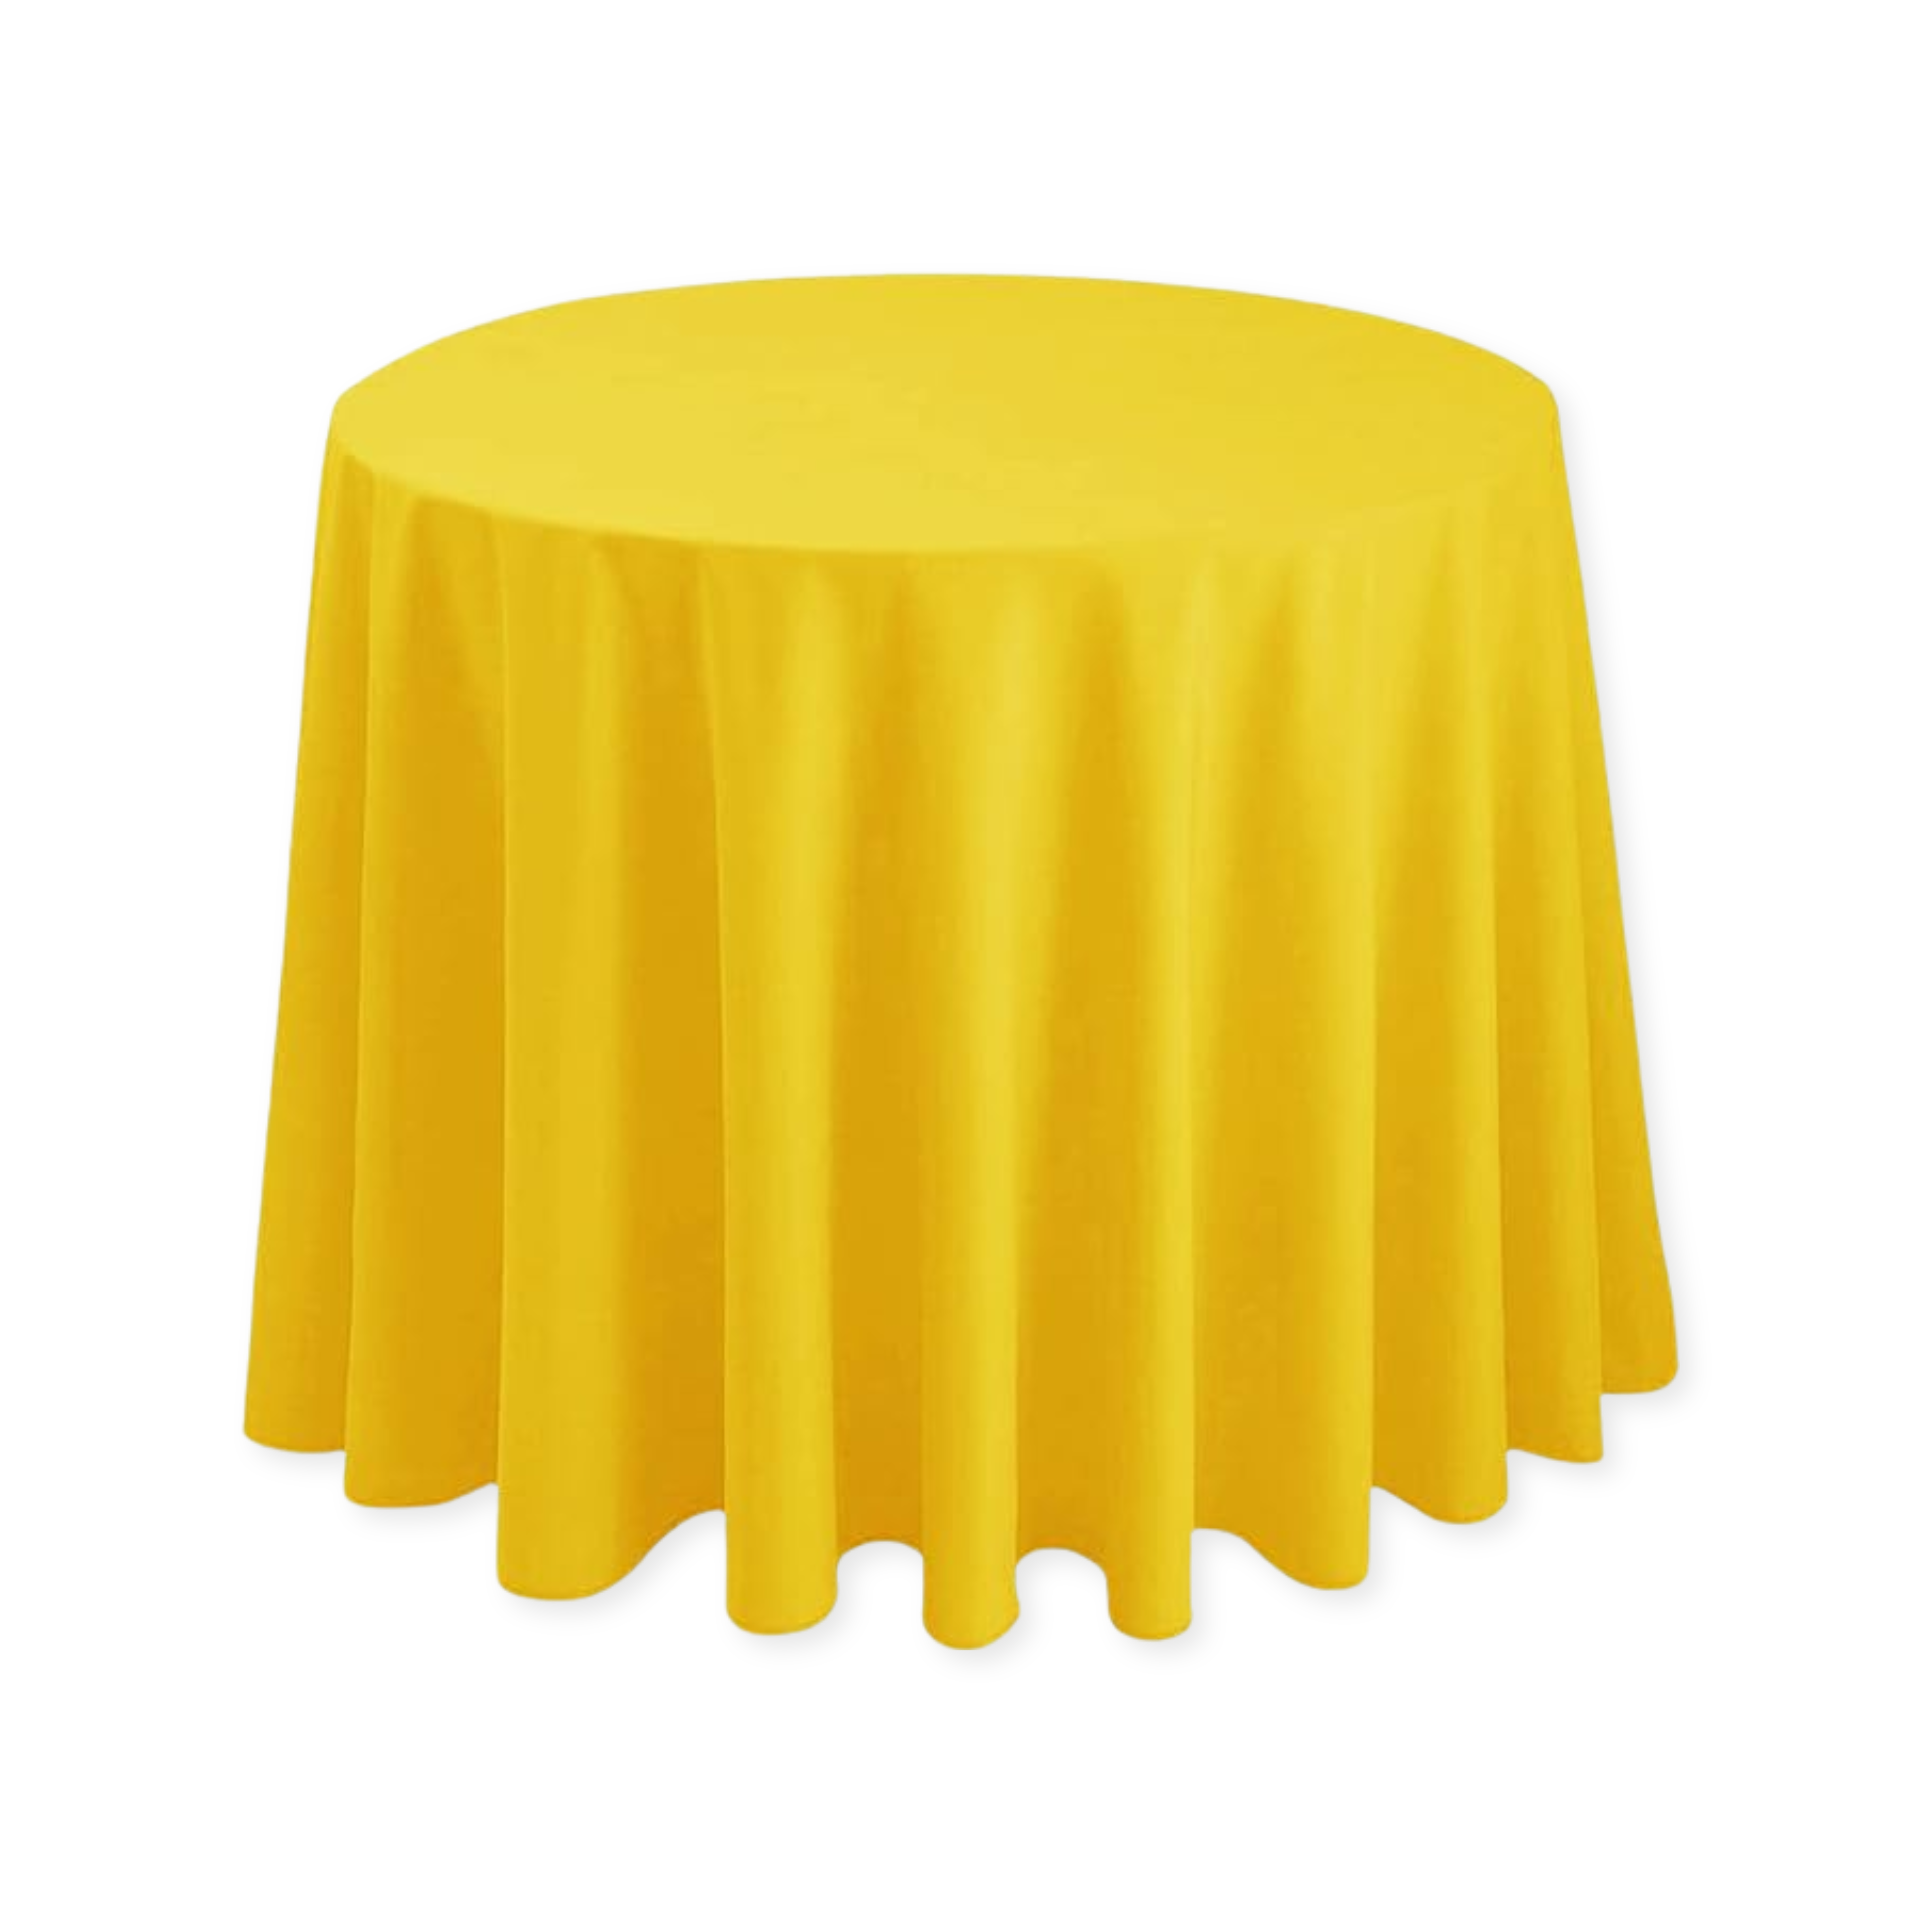 Tablecloth polyester round yellow commercial grade wedding party event rental panama city beach